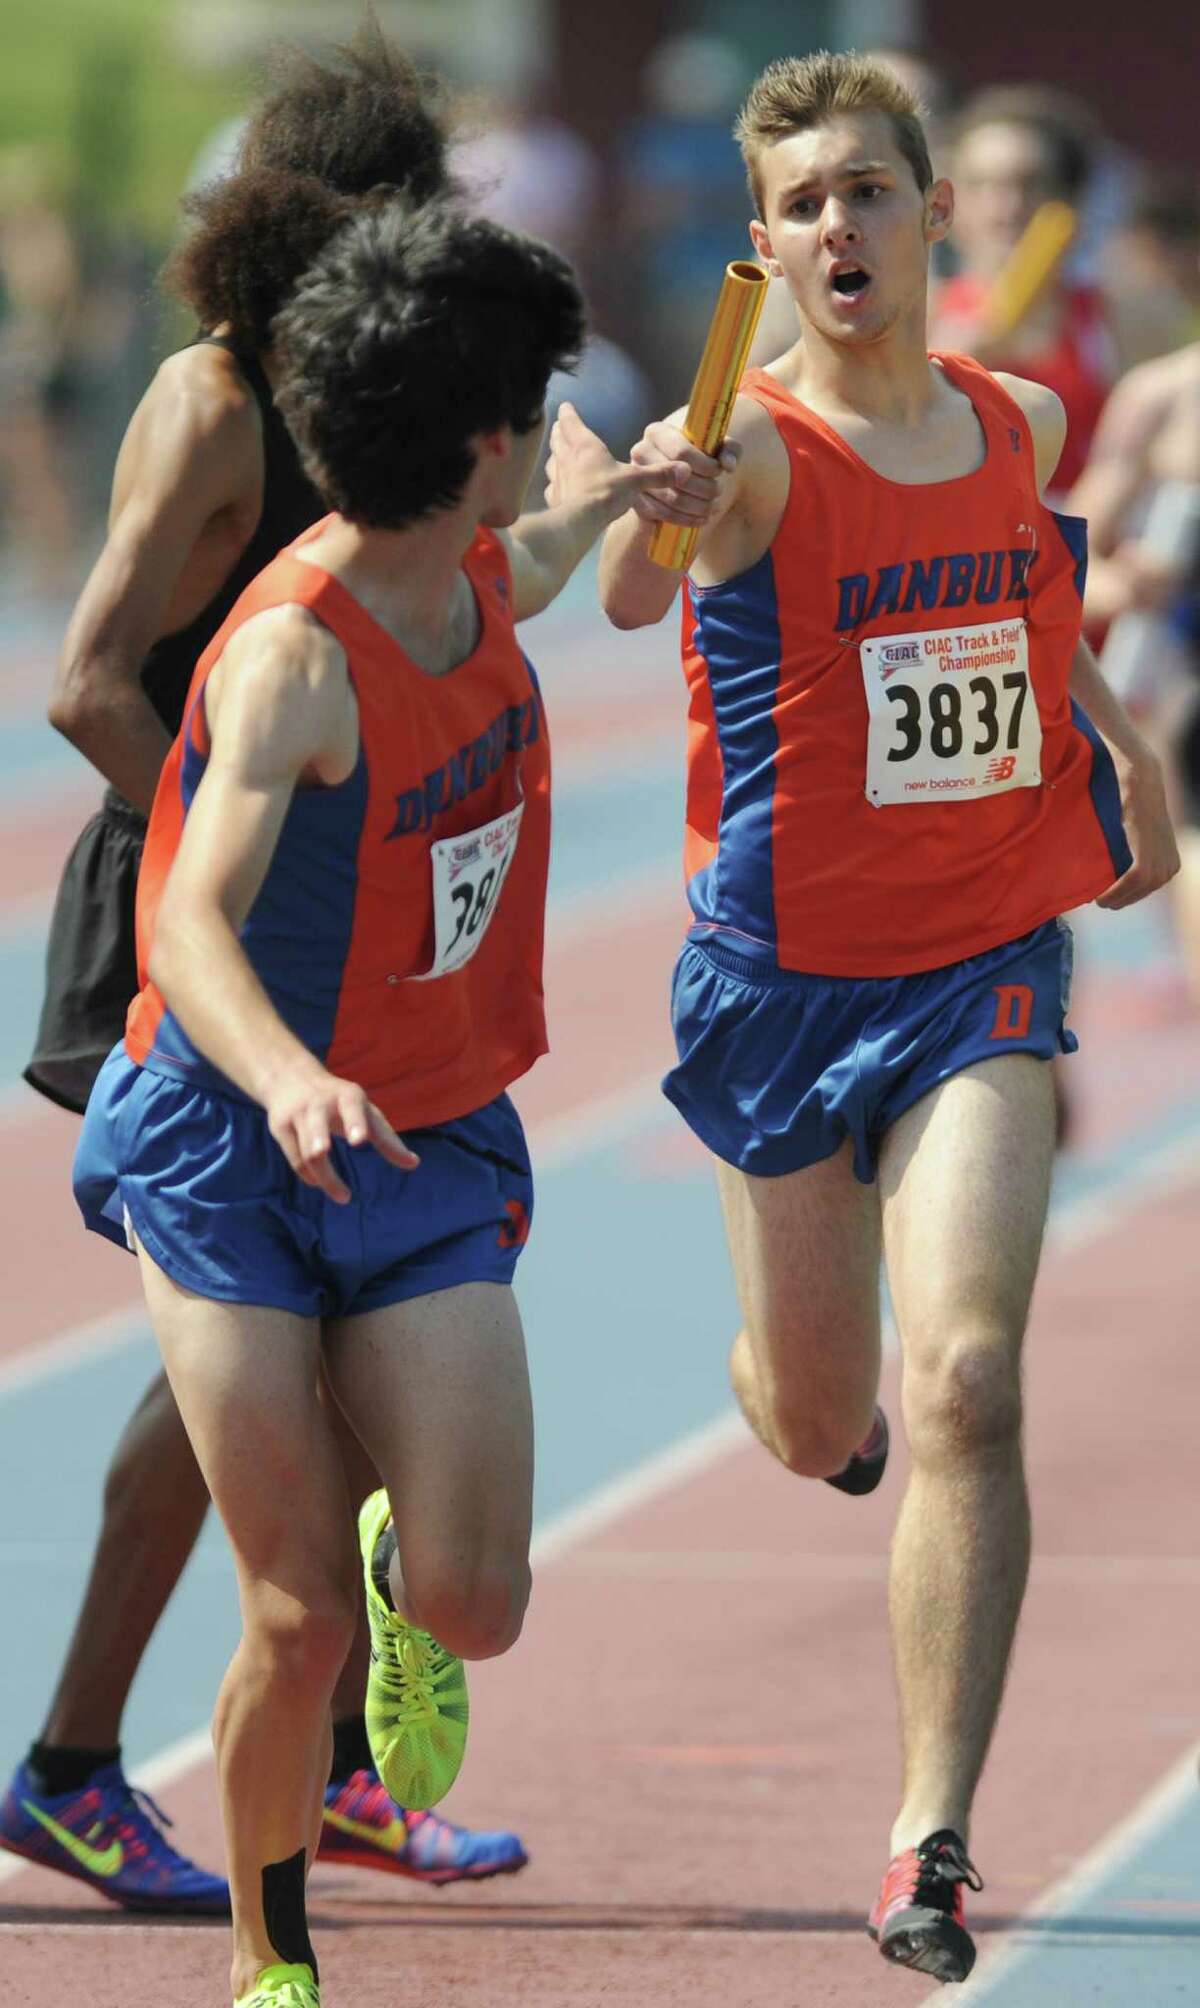 Danbury's Jake Roberts hands the baton off to Steven Farkas in the boys 4x800 meter relay at the CIAC Class LL Connecticut Outdoor Track & Field State Championship at Danbury High School in Danbury, Conn. Tuesday, June 3, 2014. Danbury won the 4x800 meter relay with a time of 8:08.25.